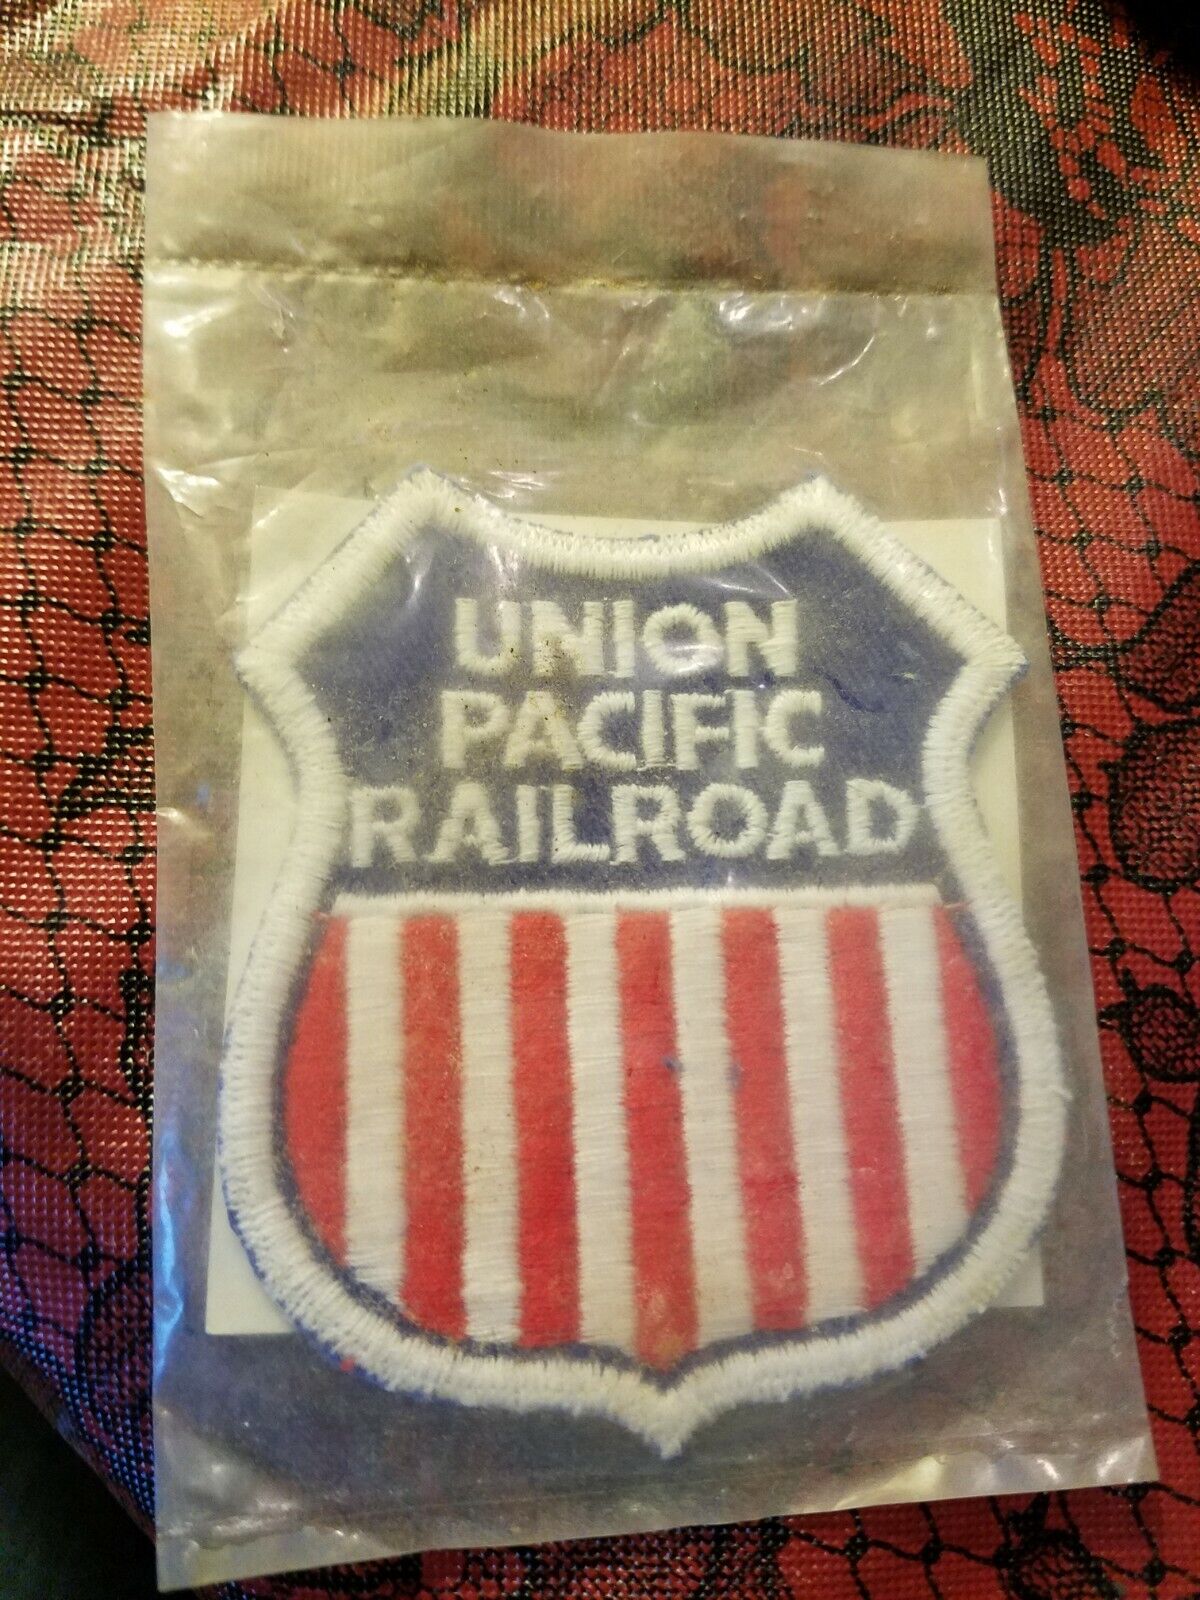 Vintage WALTHERS 93B Union Pacific Railroad Railroad Emblem Patch New in Plastic